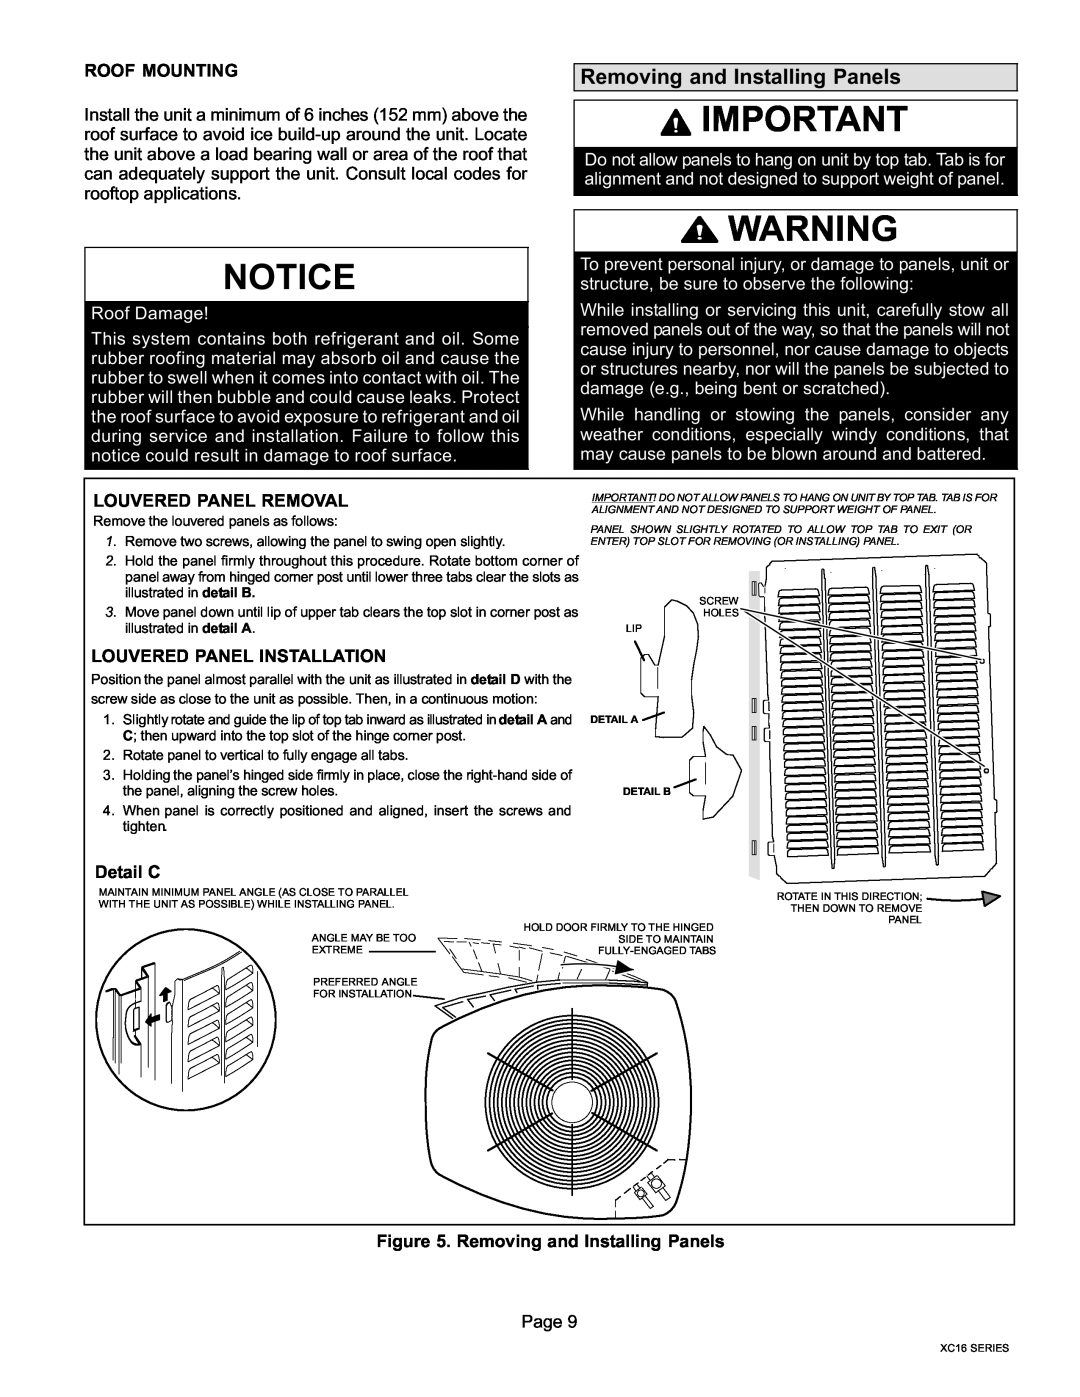 Lenox Elite Series X16 Air Conditioner Units, 506637-01 installation instructions Removing and Installing Panels 